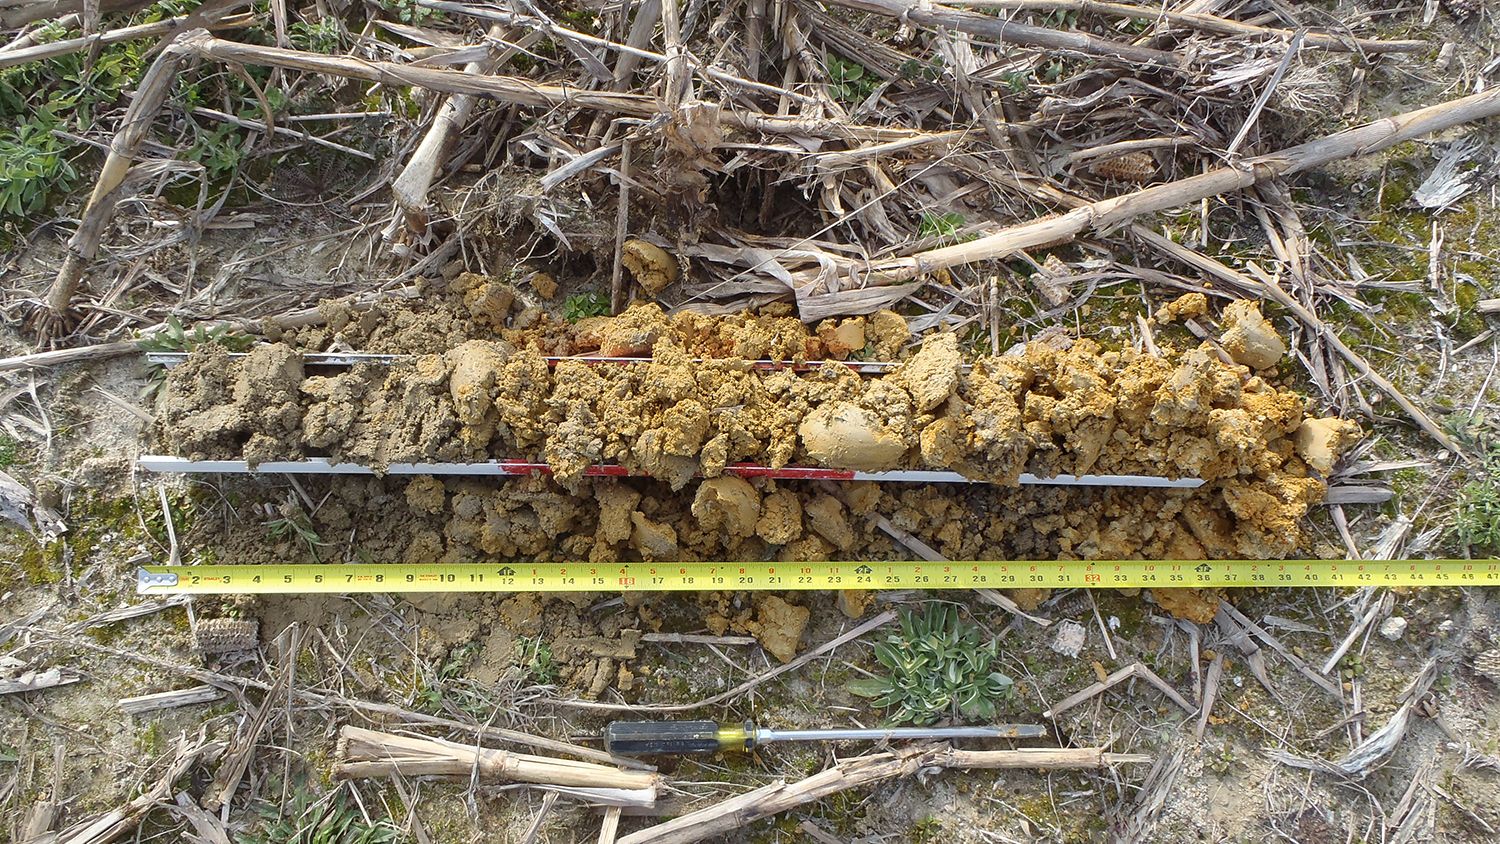 Helena B soil type sample lays on the ground